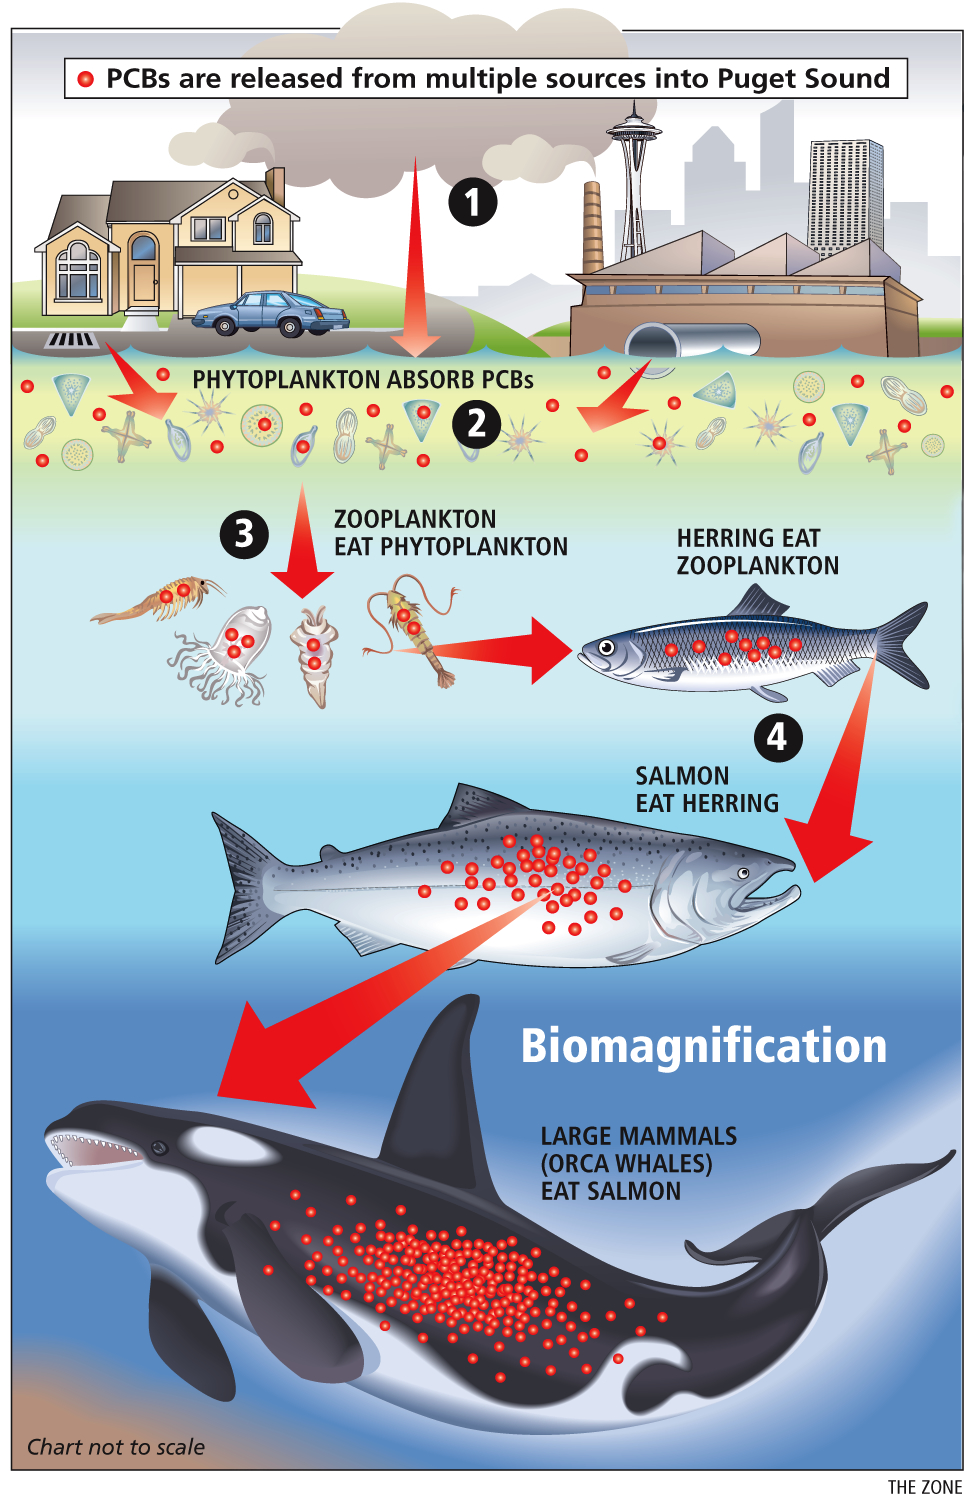 A chart showing how PCBs and other marine toxins are biomagnified as they progress up the food chain